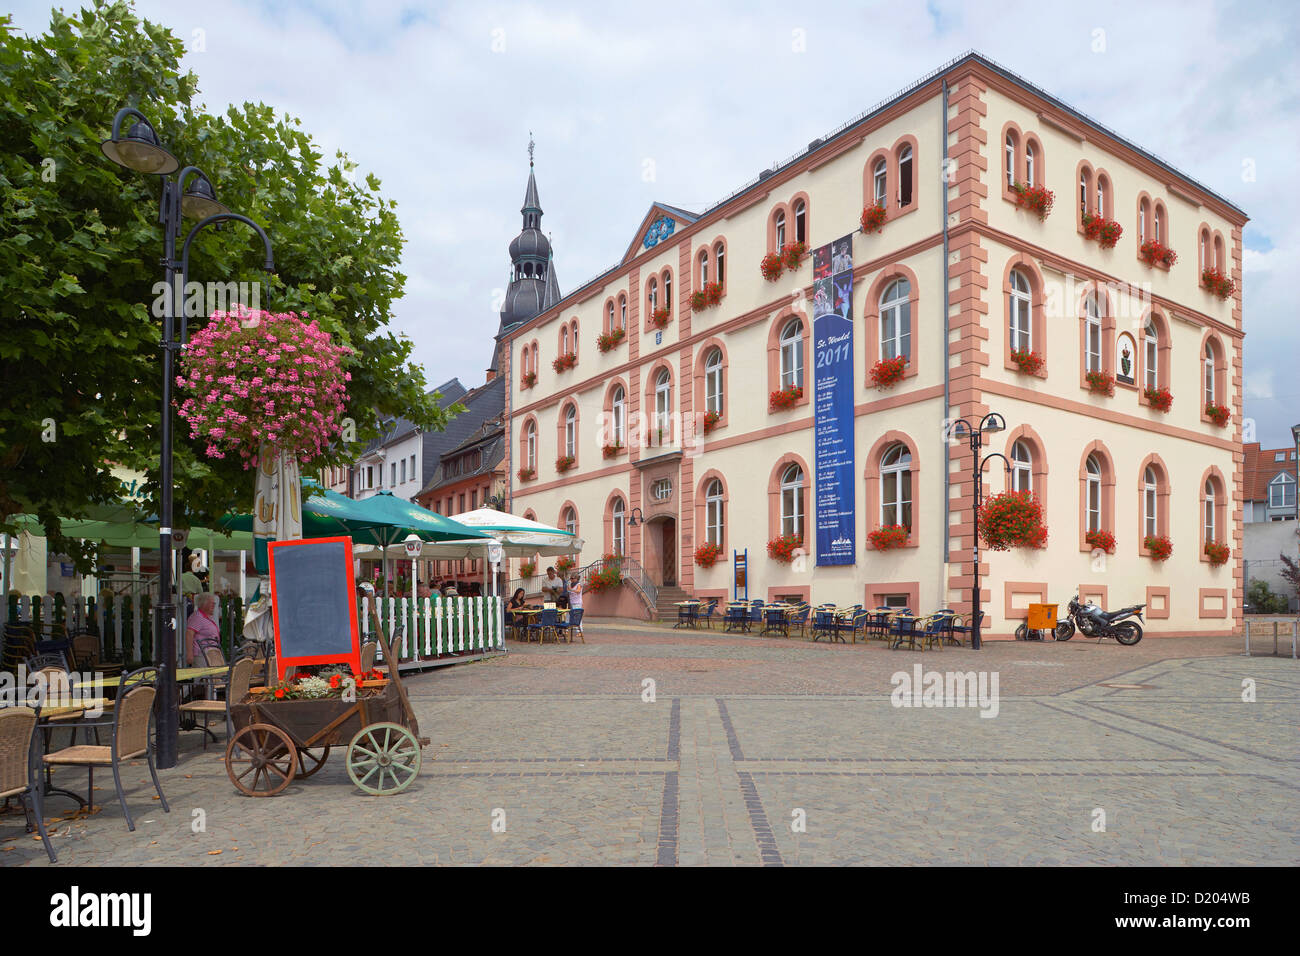 Town hall under clouded sky, St. Wendel, Saarland, Germany, Europe Stock Photo